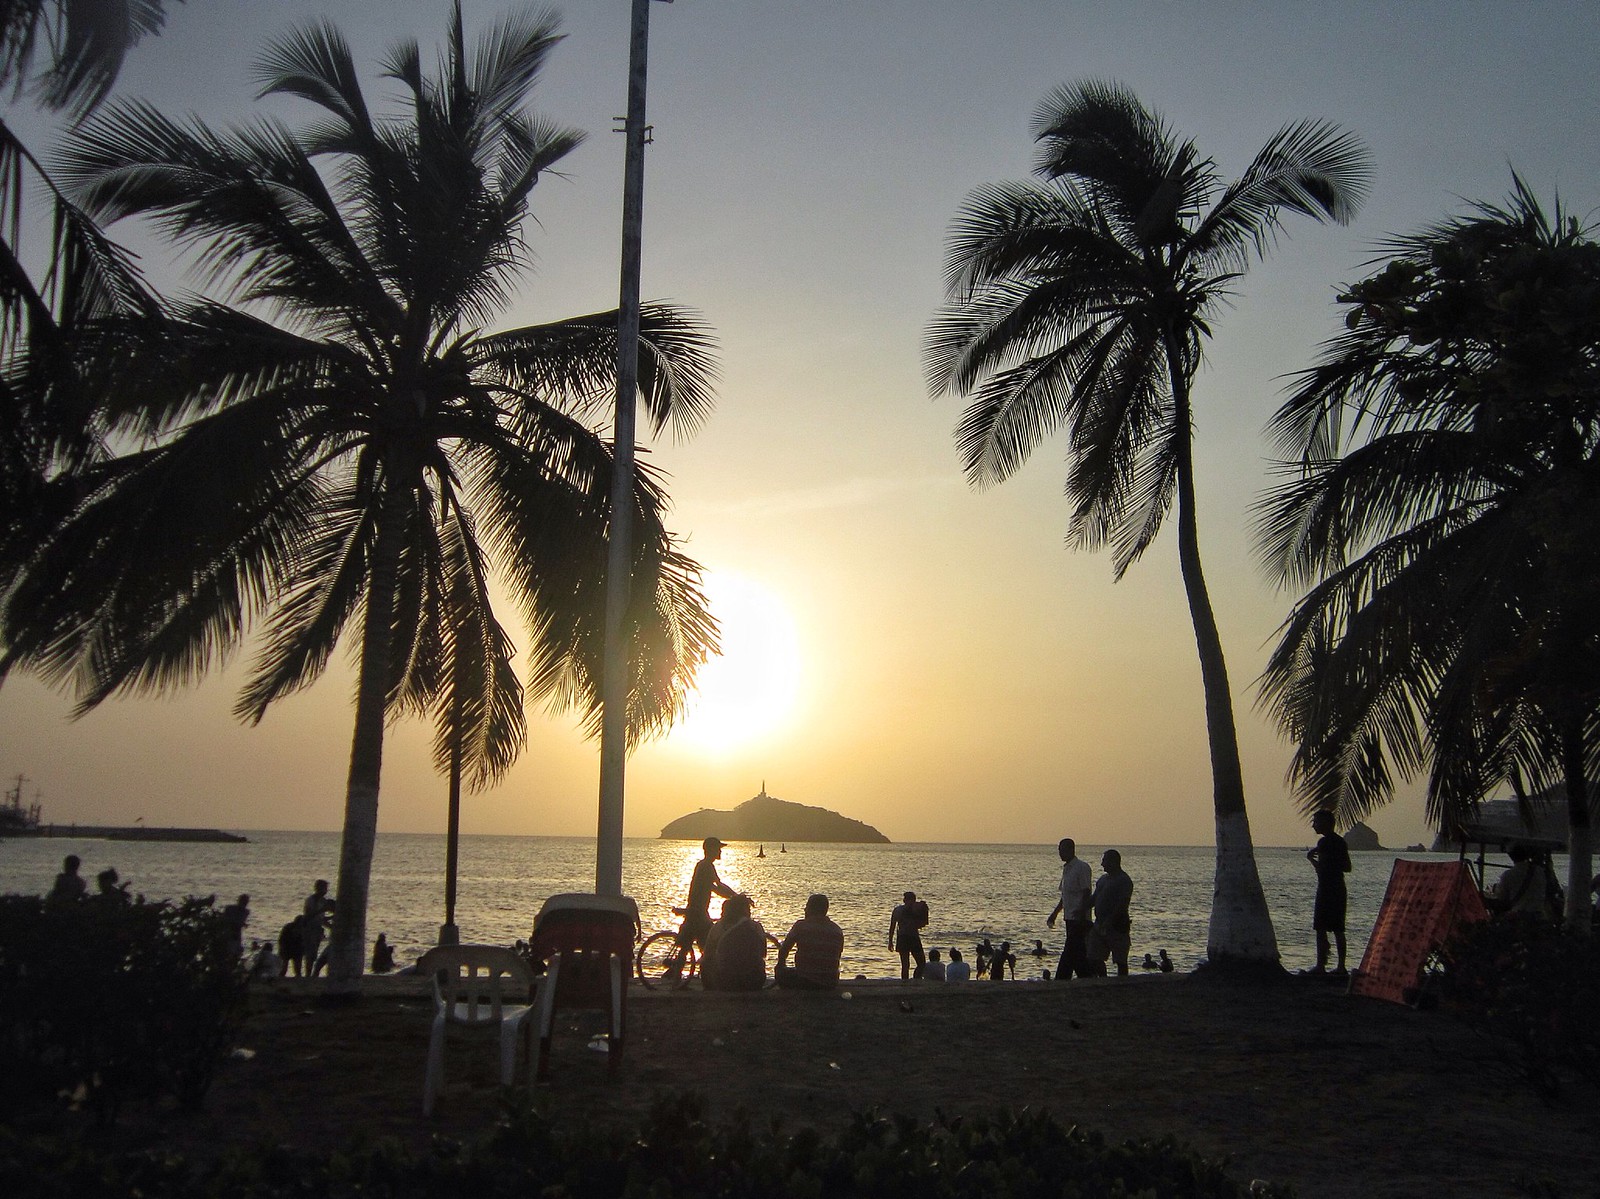 Sunset at the beach in Santa Marta, Colombia